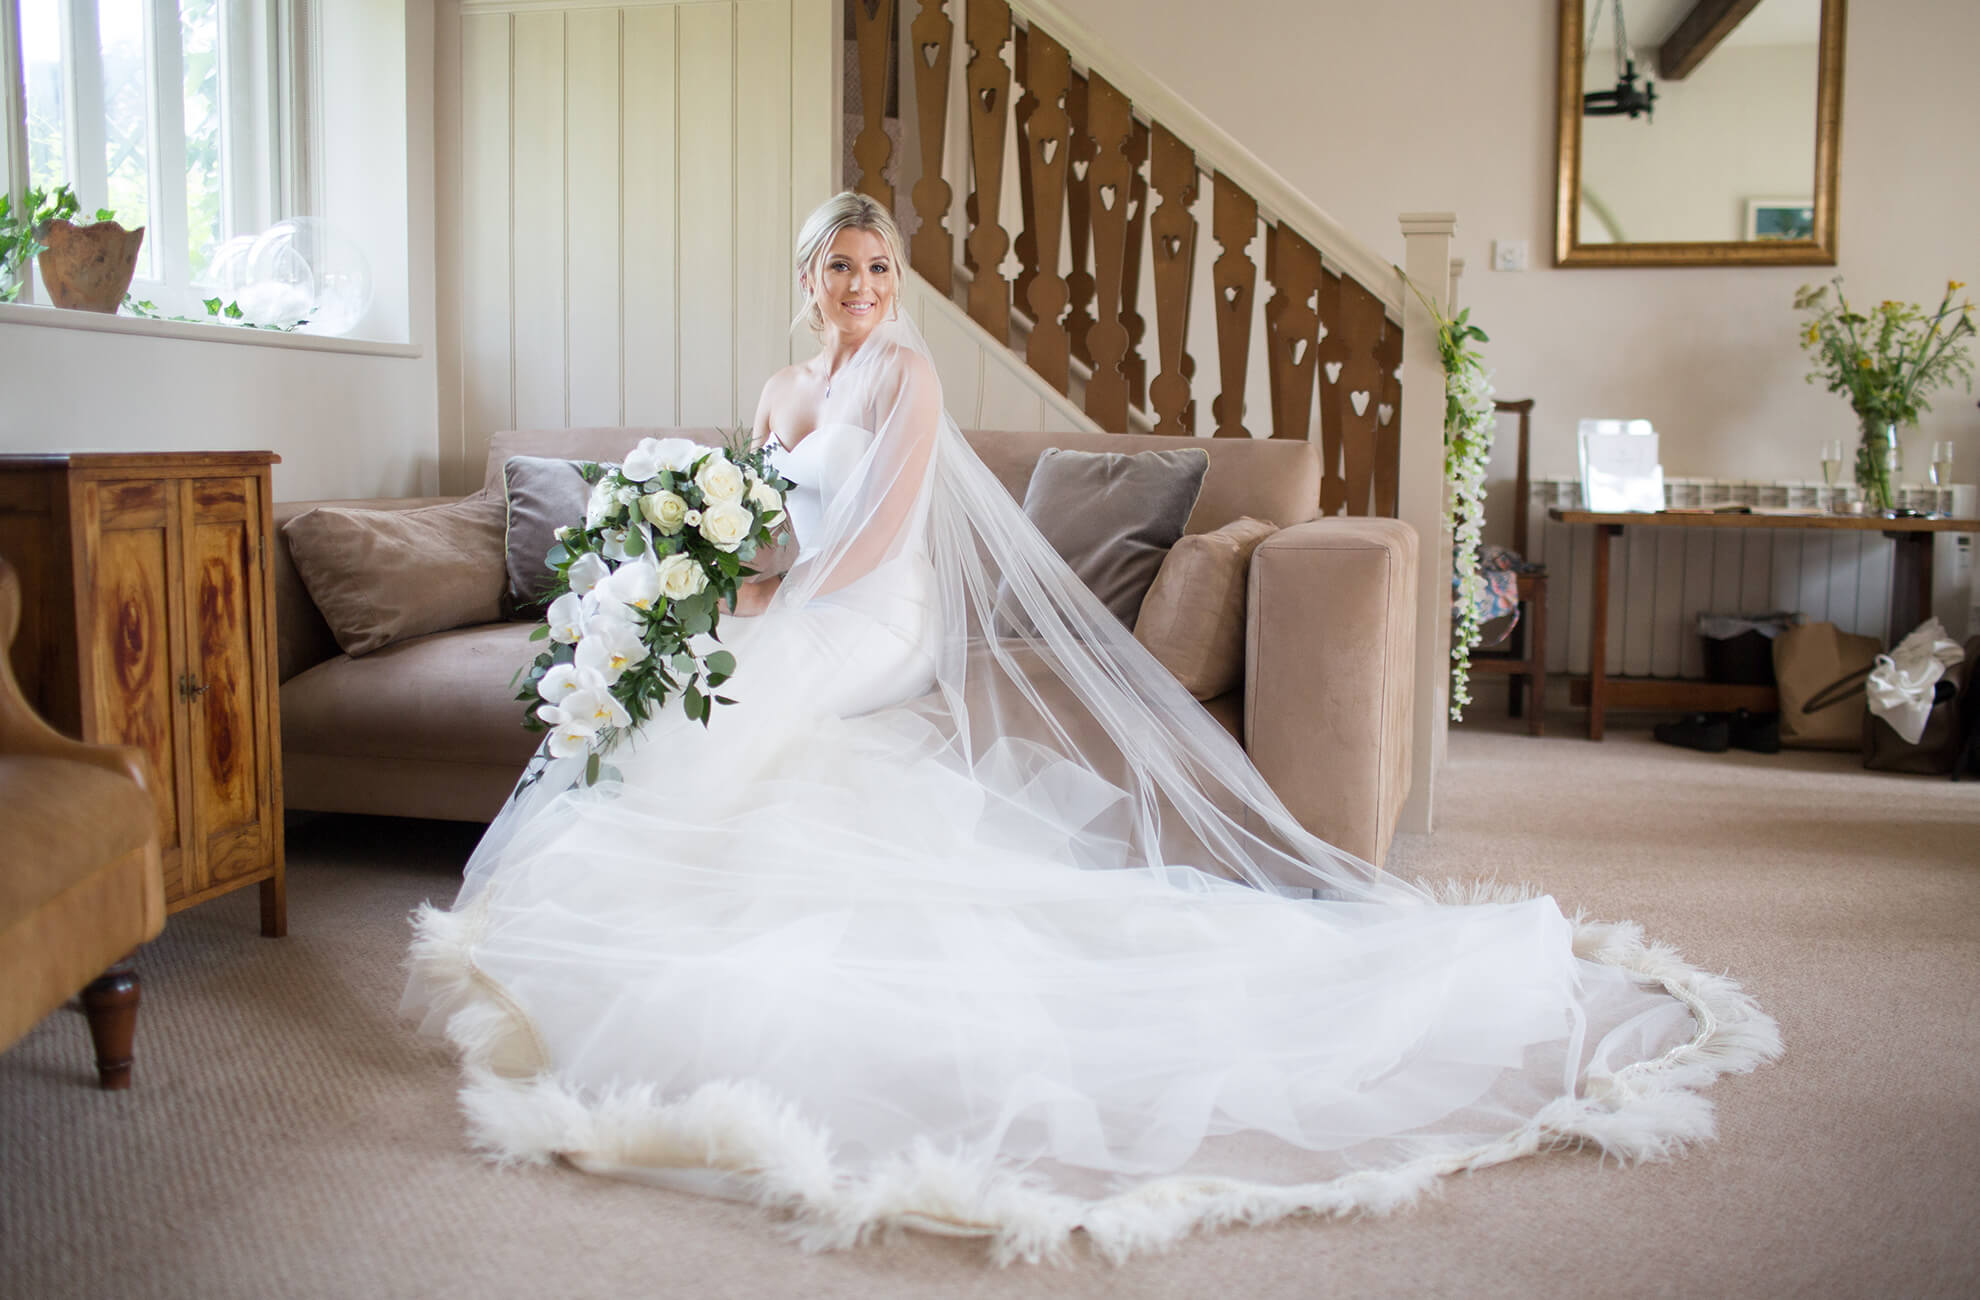 For her wedding day the bride wears a beautiful white bridal gown with a feather edged veil